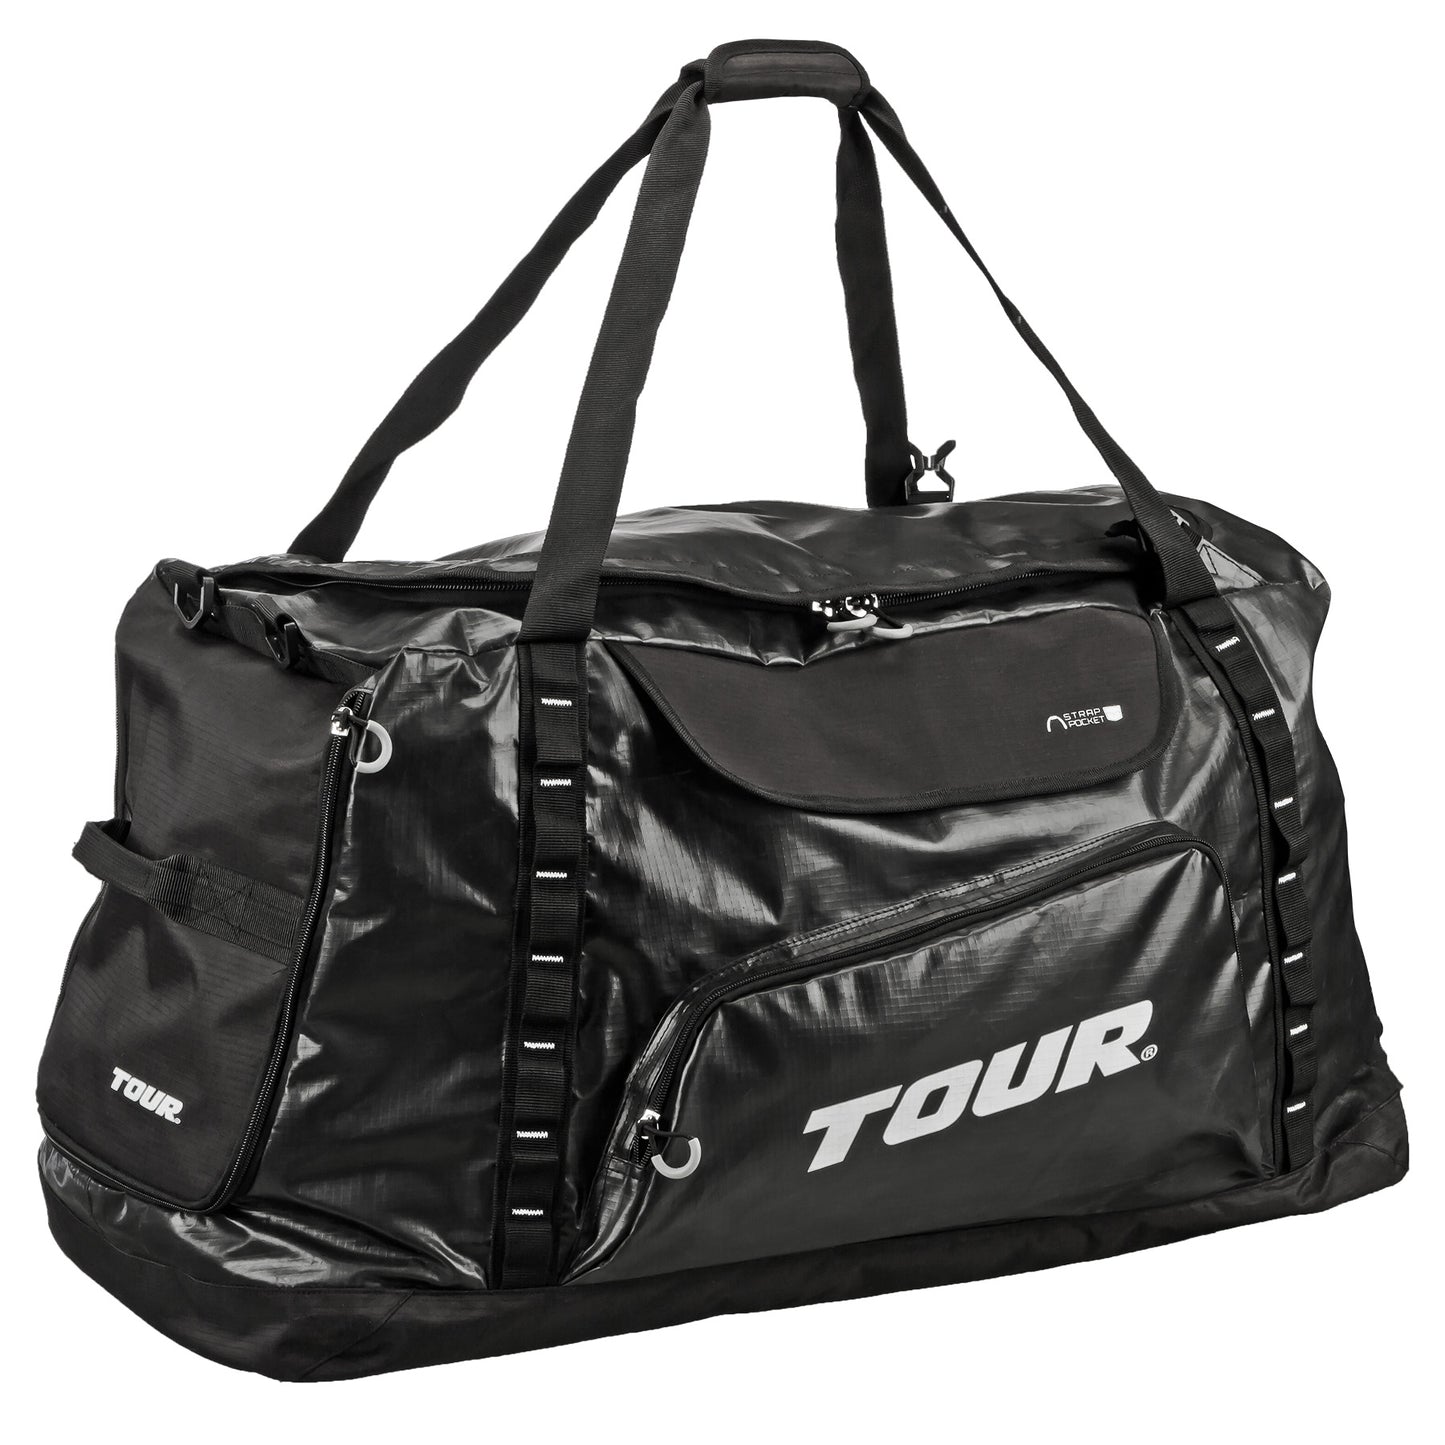 Toolshed Hybrid Junior Players Bag